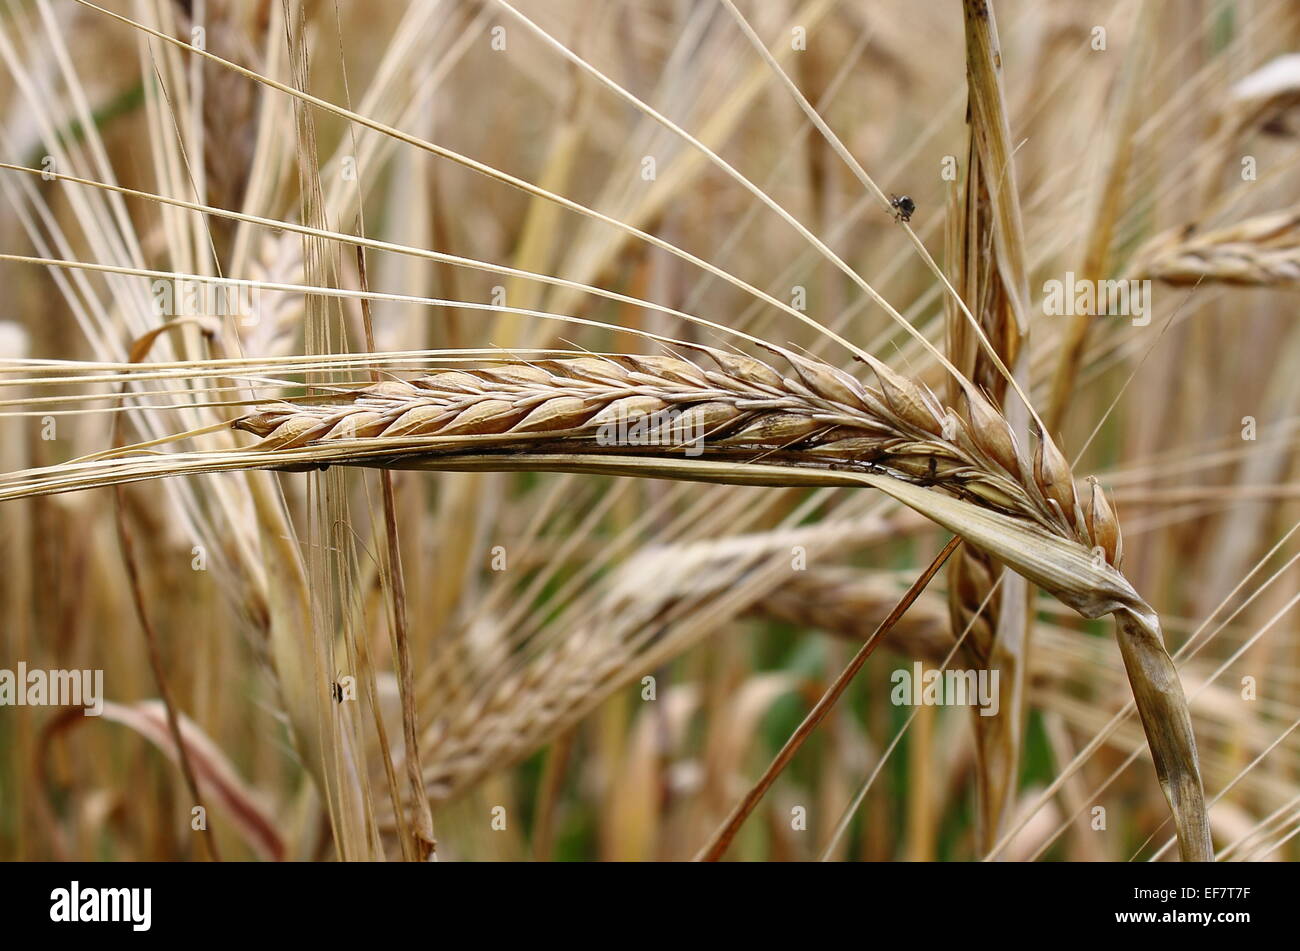 Ripe wheat ear on background of a cereal field Stock Photo